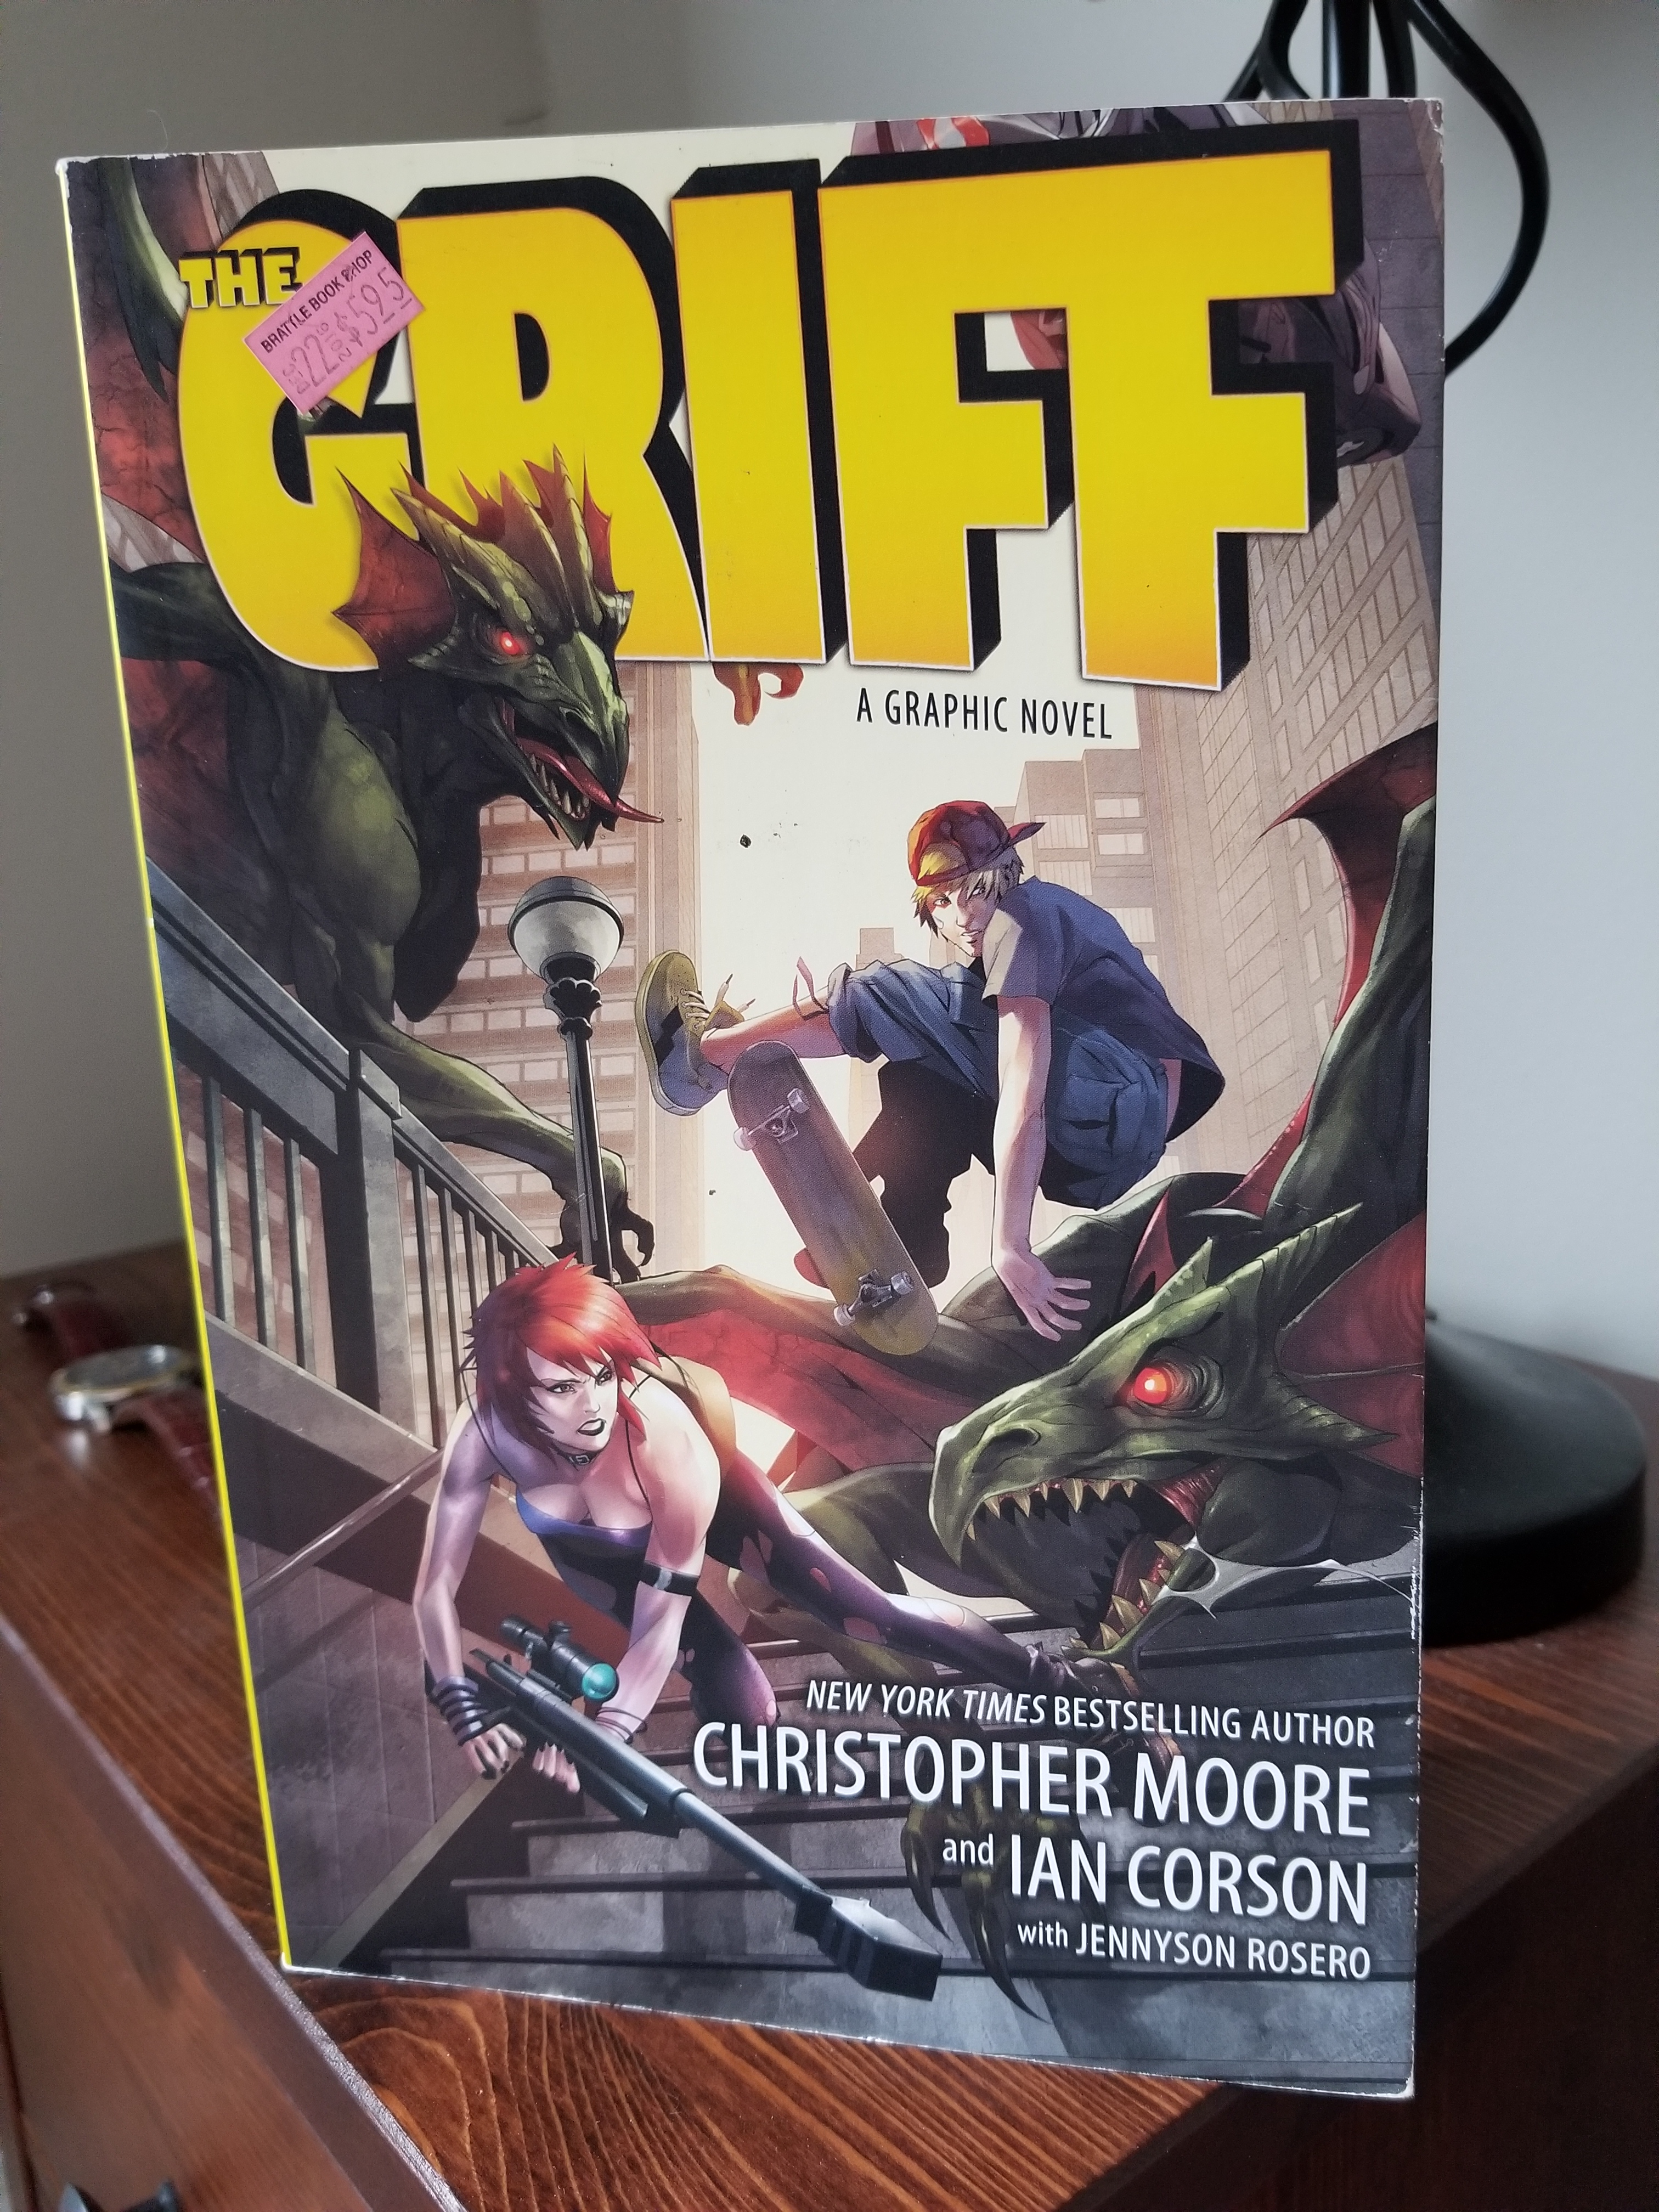 [Image is a comic book cover for The Griff by Christopher Moore and Ian Corson]